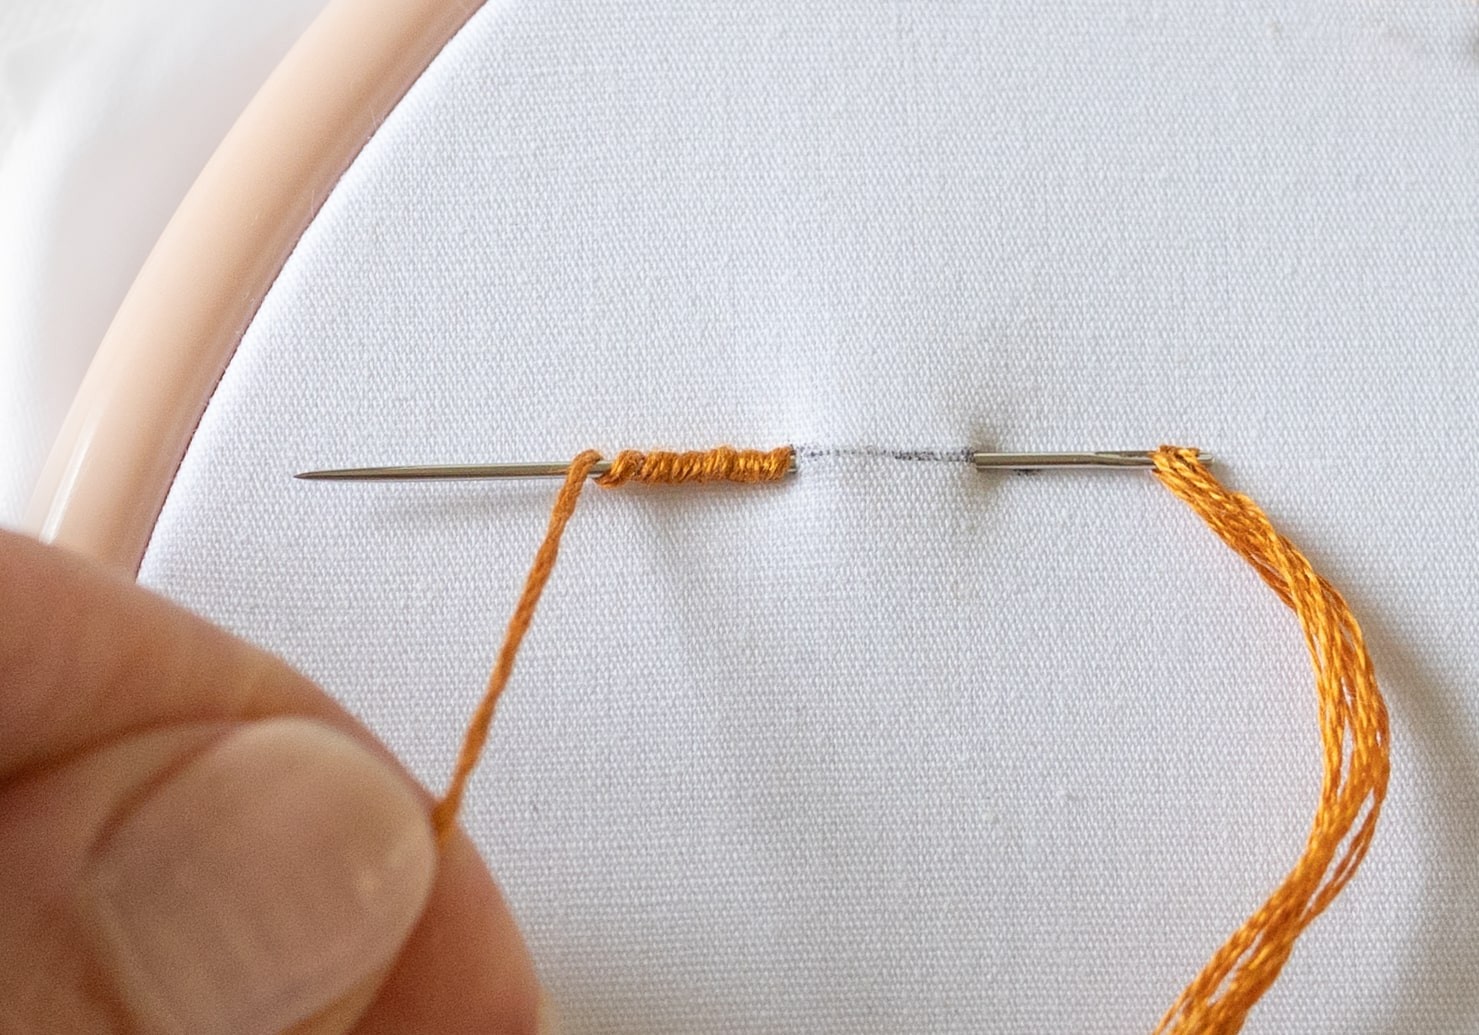 Thread is wrapped around a needle and pulled through cotton.